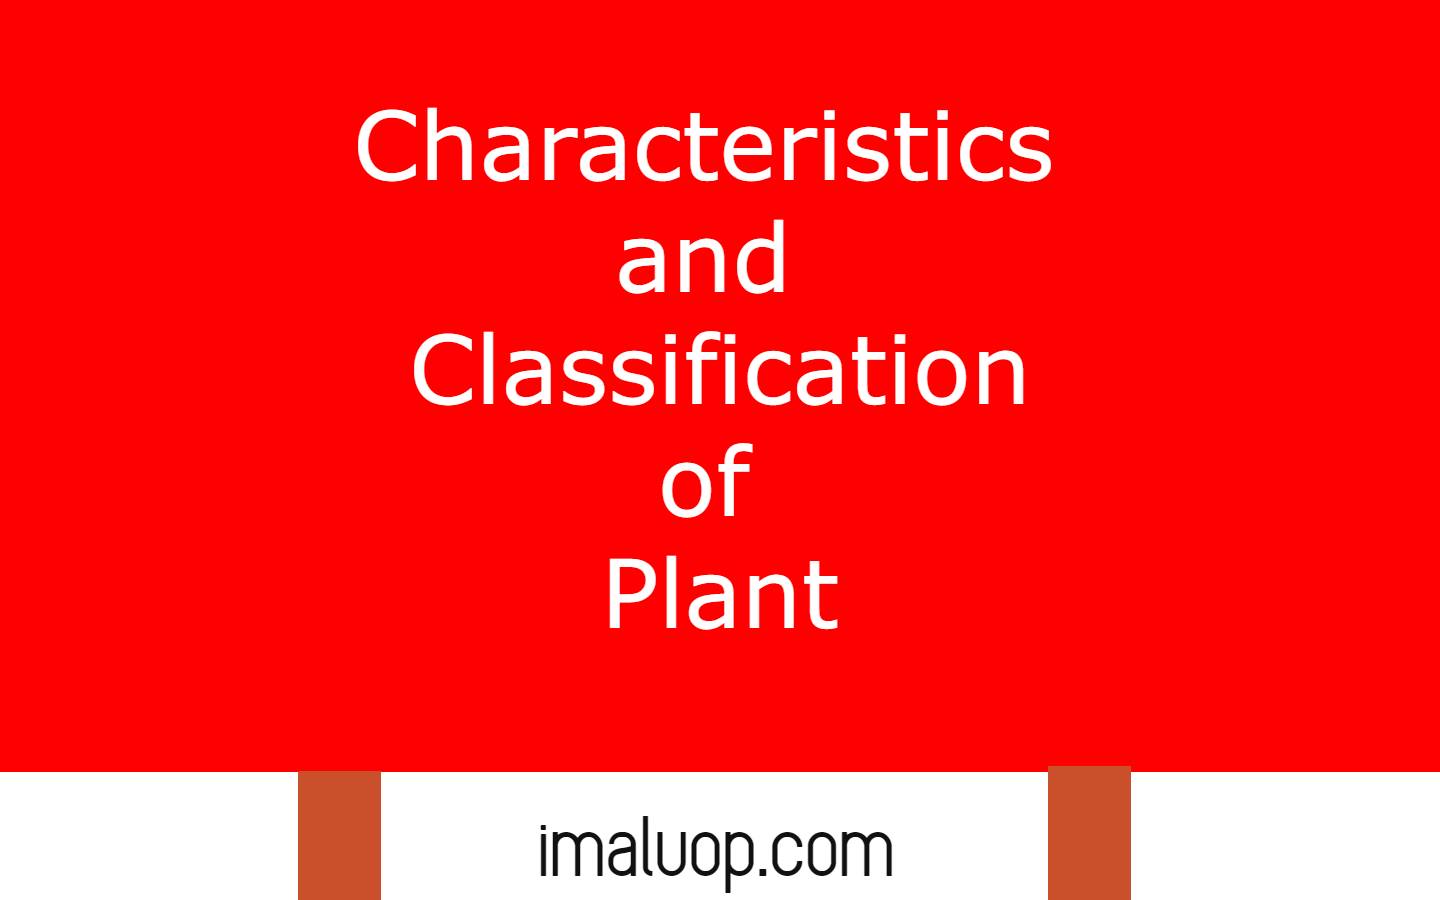 Characteristics and Classification of Plant